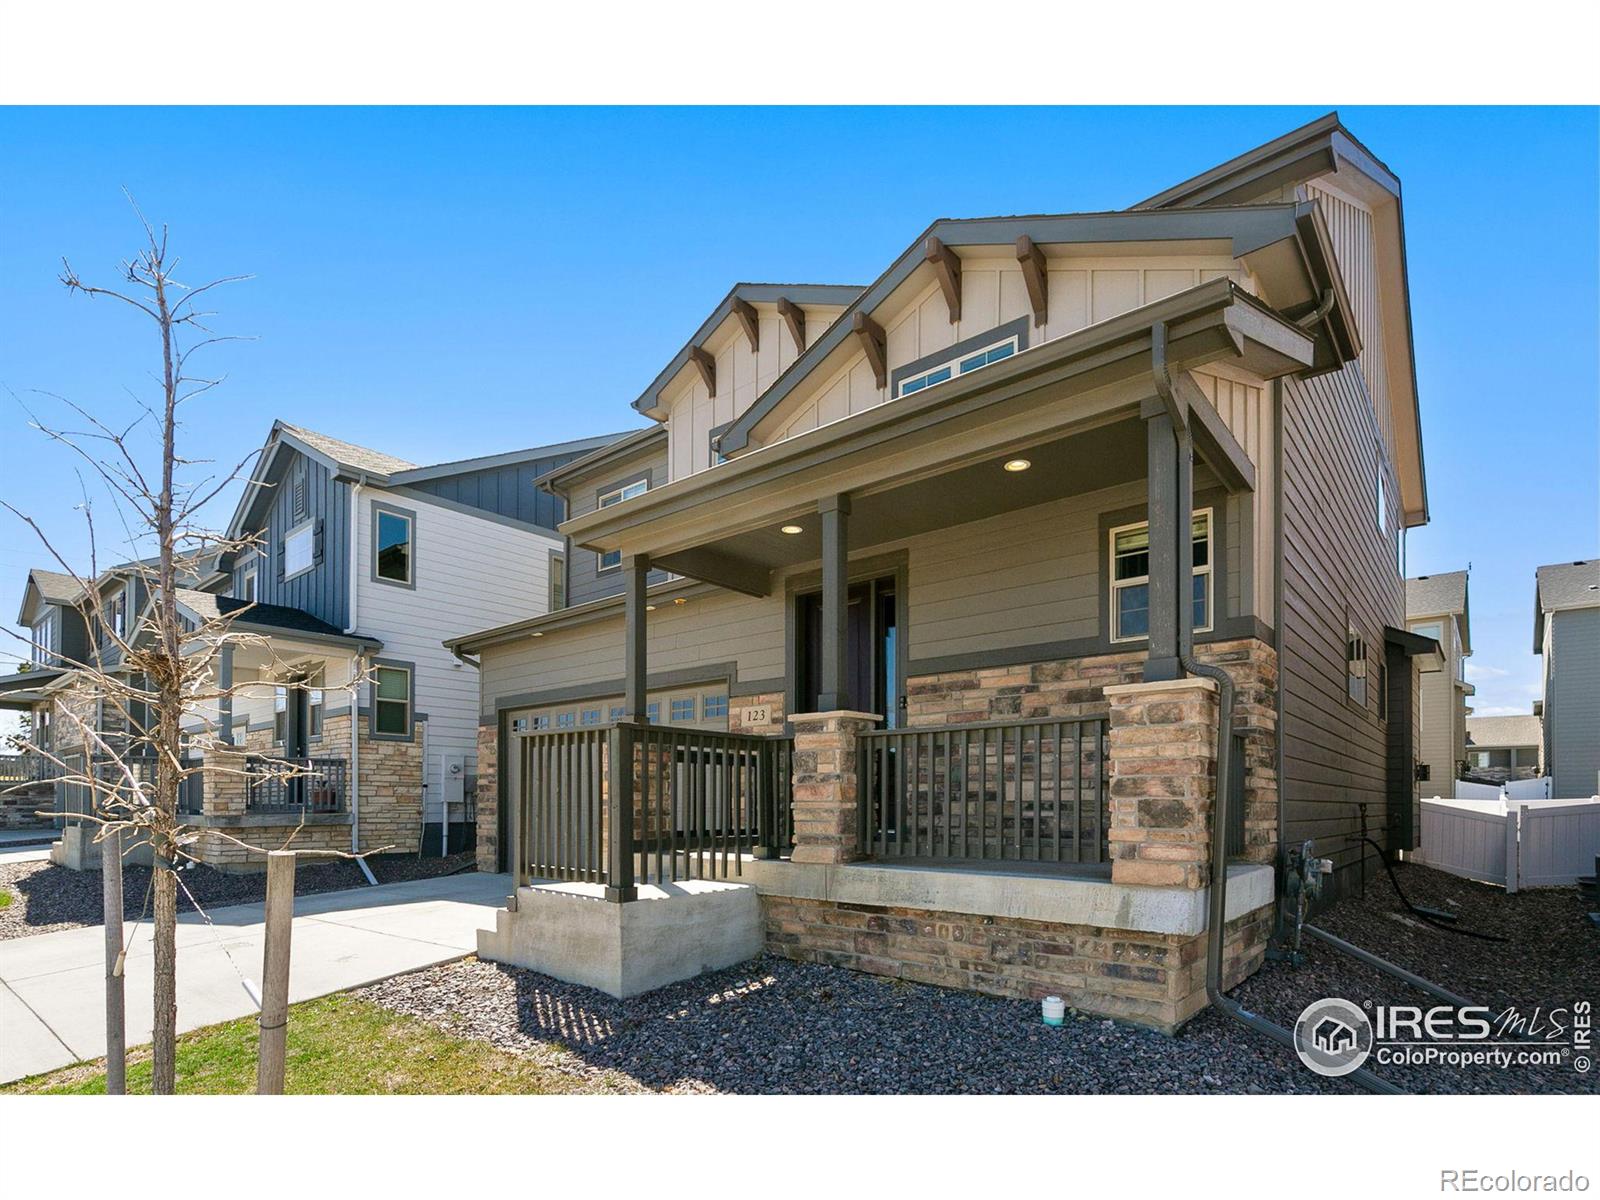 Report Image for 123  Anders Court,Loveland, Colorado